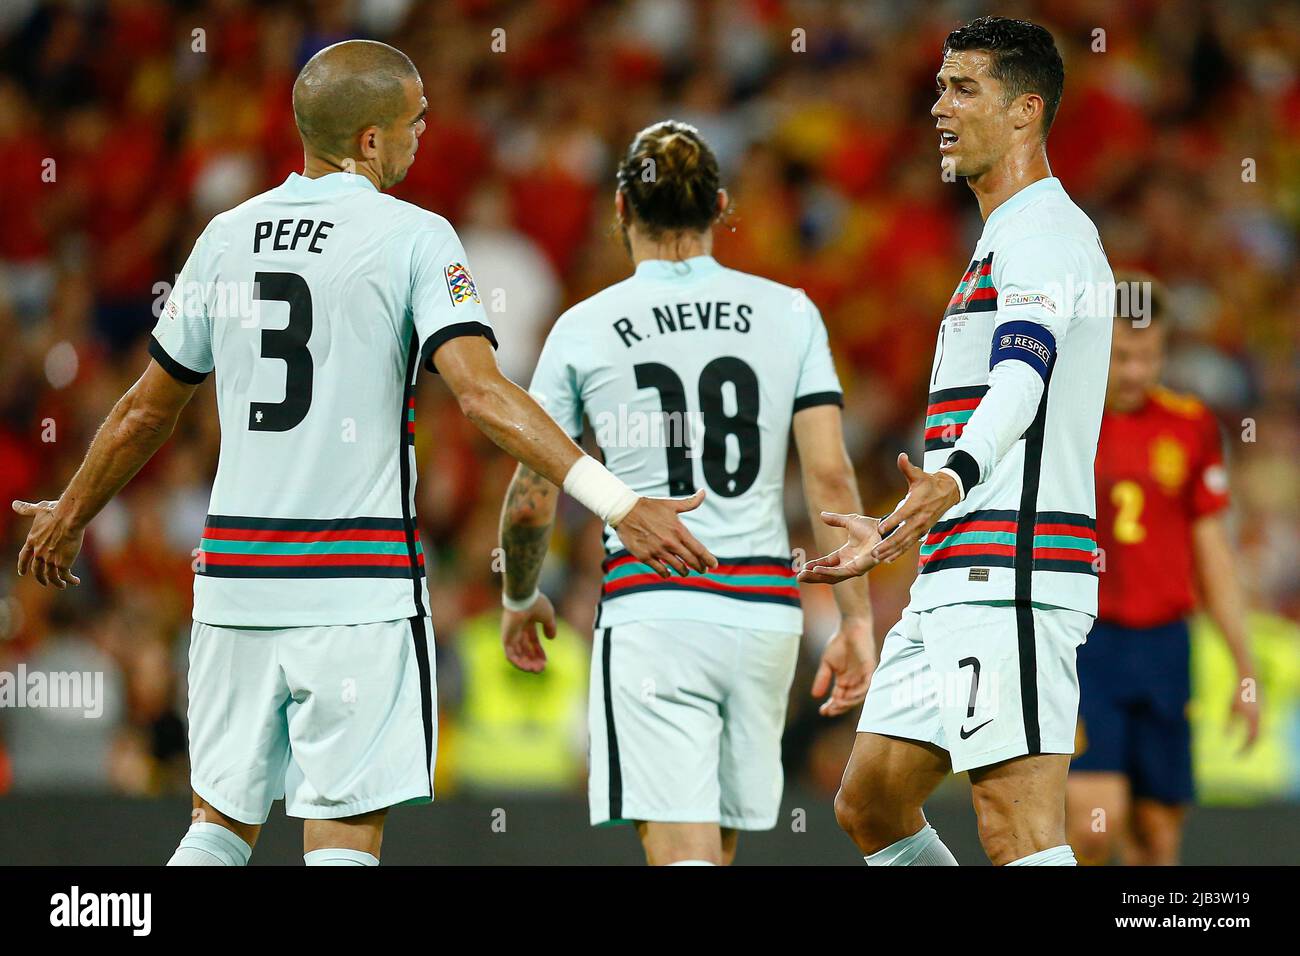 Cristiano Ronaldo and Kepler Laveran Pepe of Portugal during the UEFA Nations League match between Spain and Portugal played at Benito Villamarin Stadium on June 2, 2022 in Sevilla, Spain. (Photo by Antonio Pozo / PRESSINPHOTO) Stock Photo